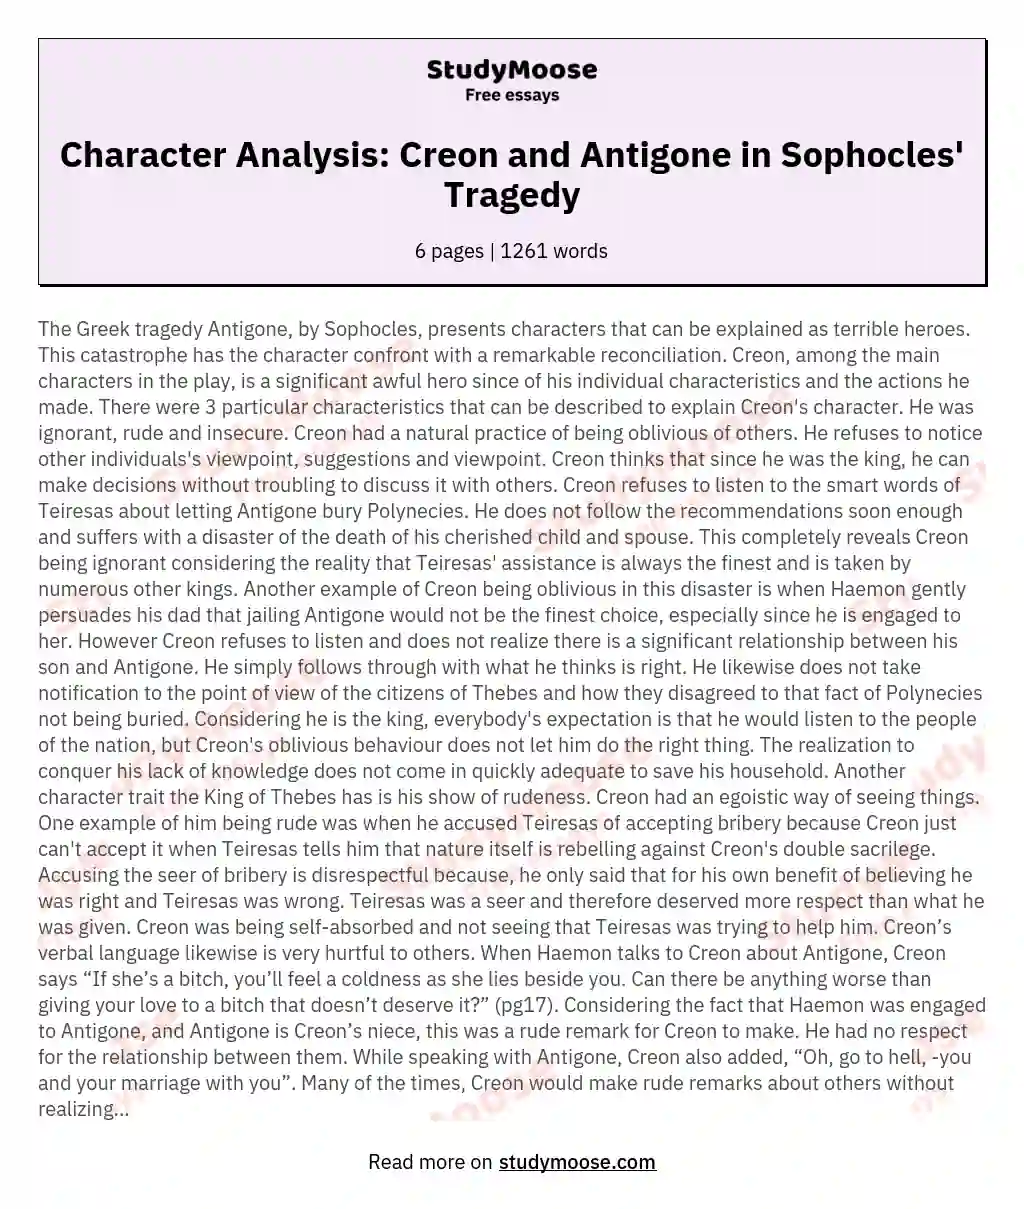 Character Analysis: Creon and Antigone in Sophocles' Tragedy essay